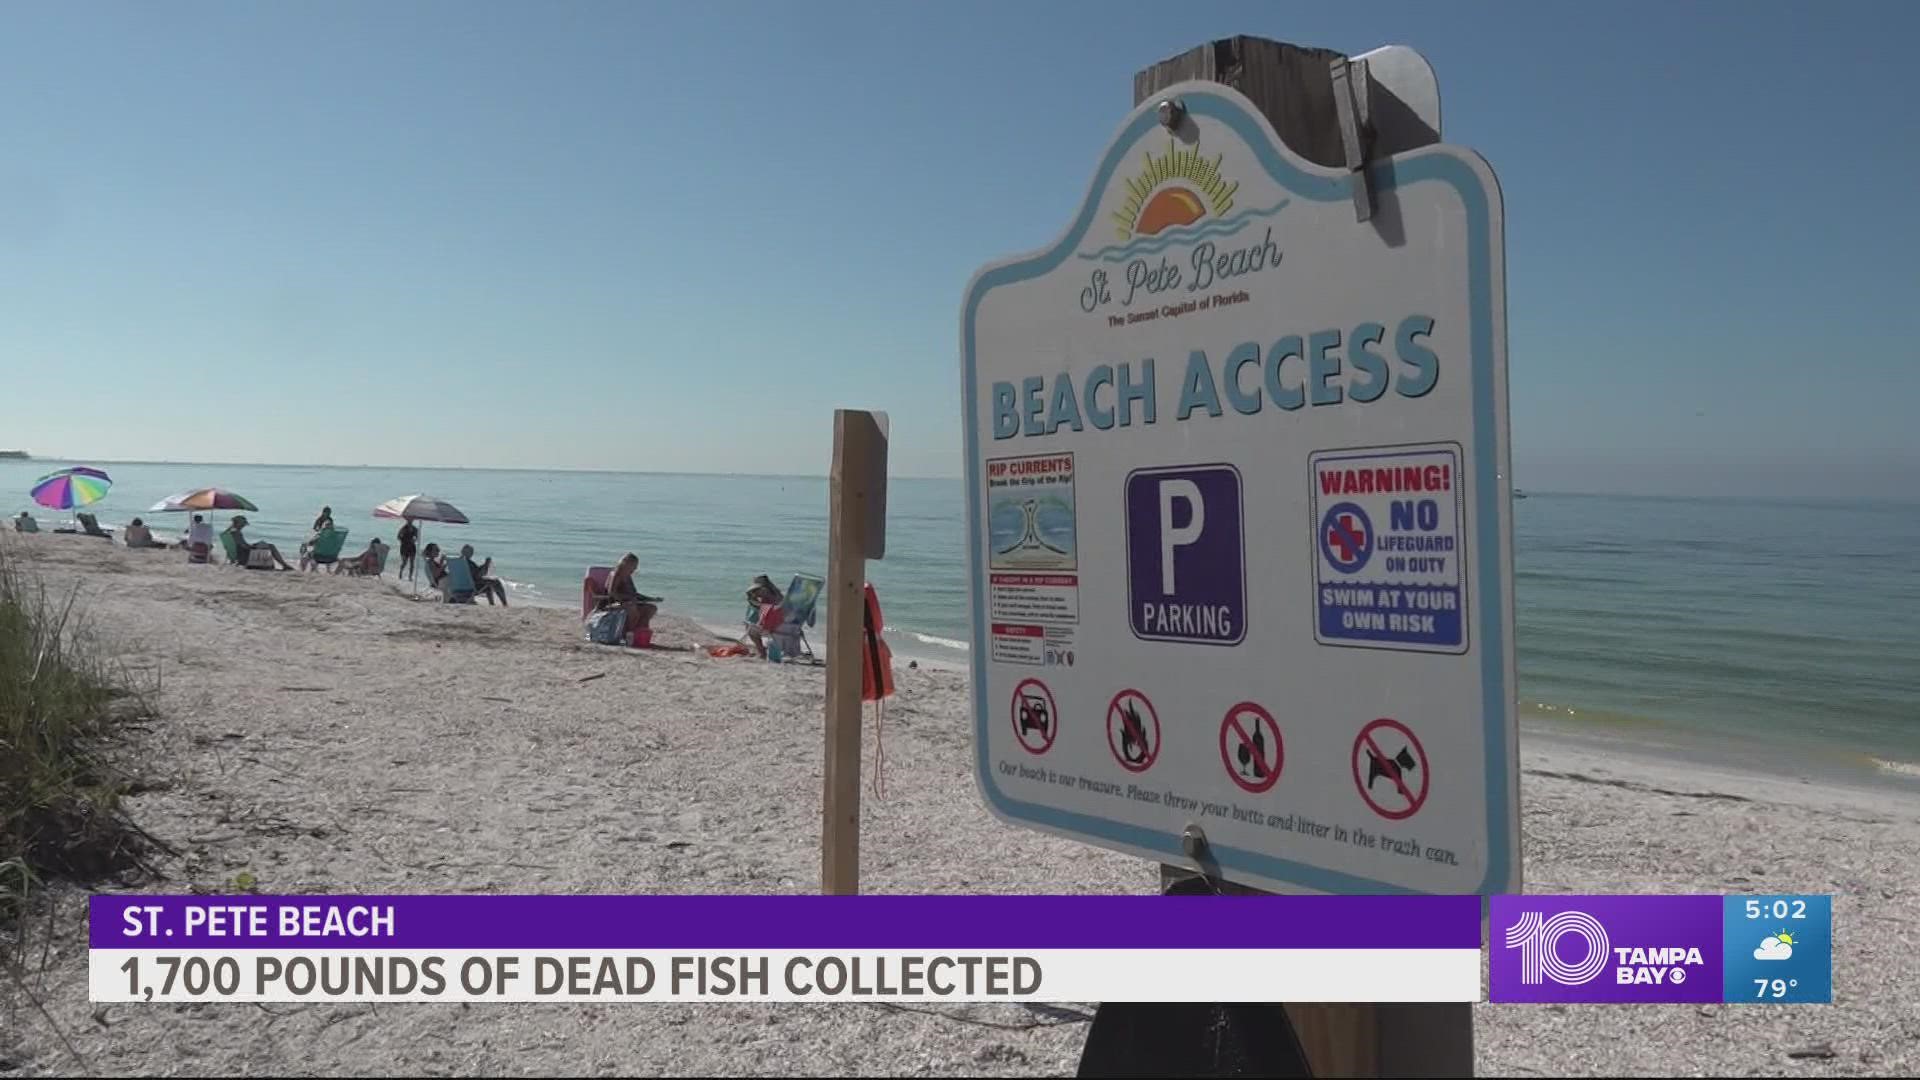 Crews working from Thursday to Monday removed nearly one ton worth of dead fish from the shores of St. Pete Beach.